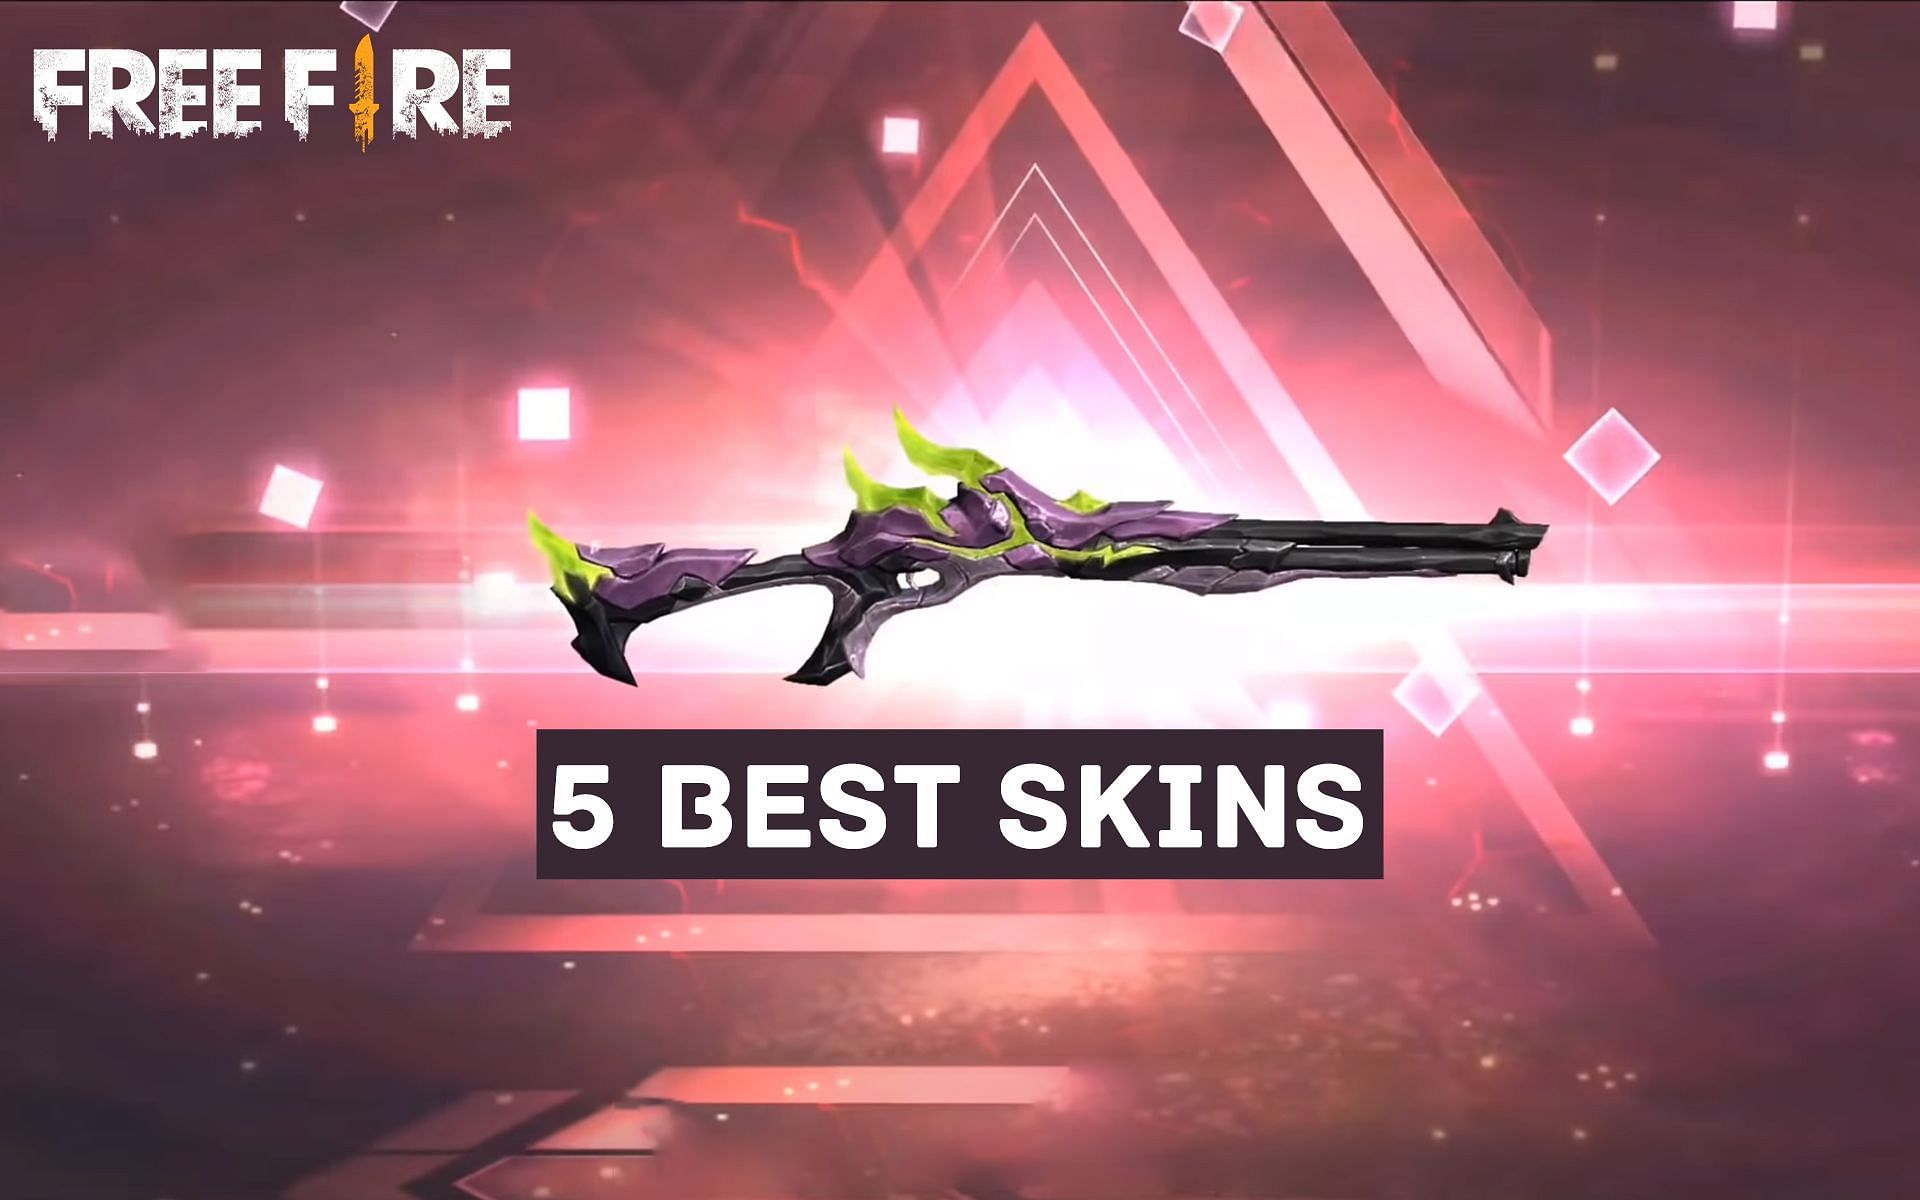 New skins are added periodically in Free Fire (Image via Sportskeeda)